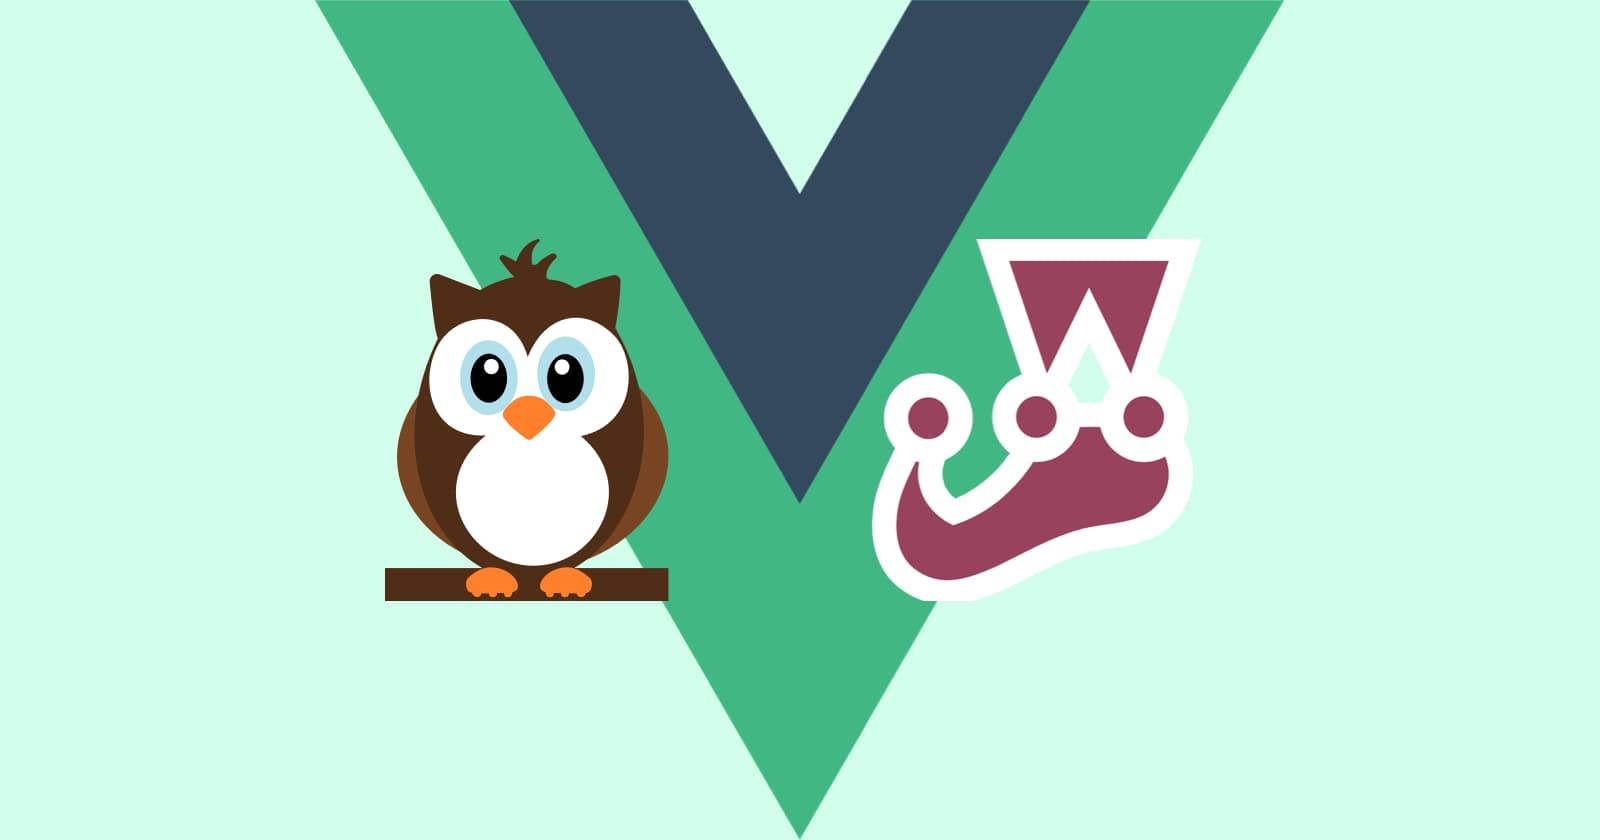 How to Test Your Vue Project with Jest and Nightwatch